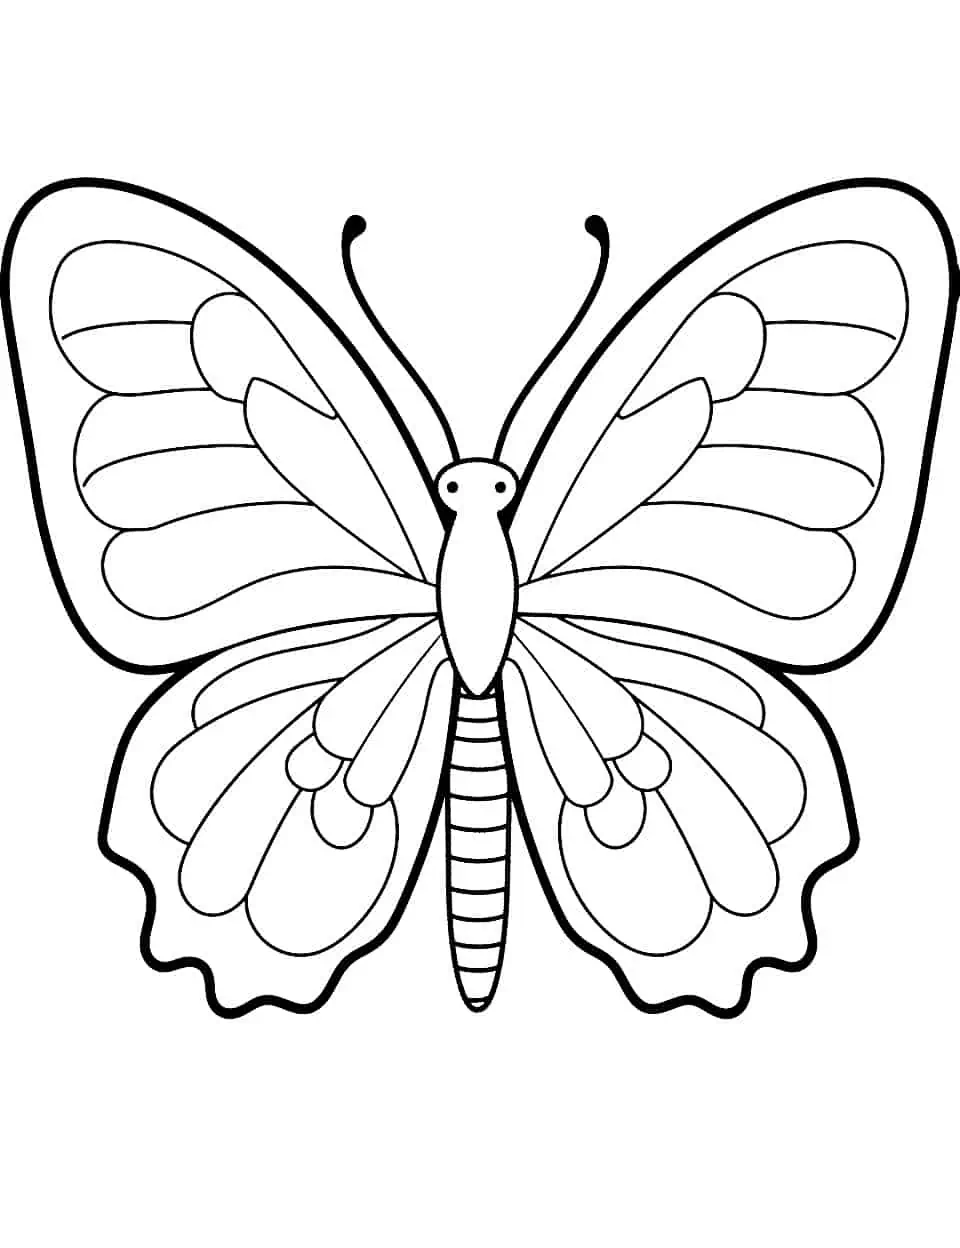 Simple Symmetry Butterfly Coloring Page - An easy coloring page with a symmetrical butterfly outline, perfect for preschoolers.